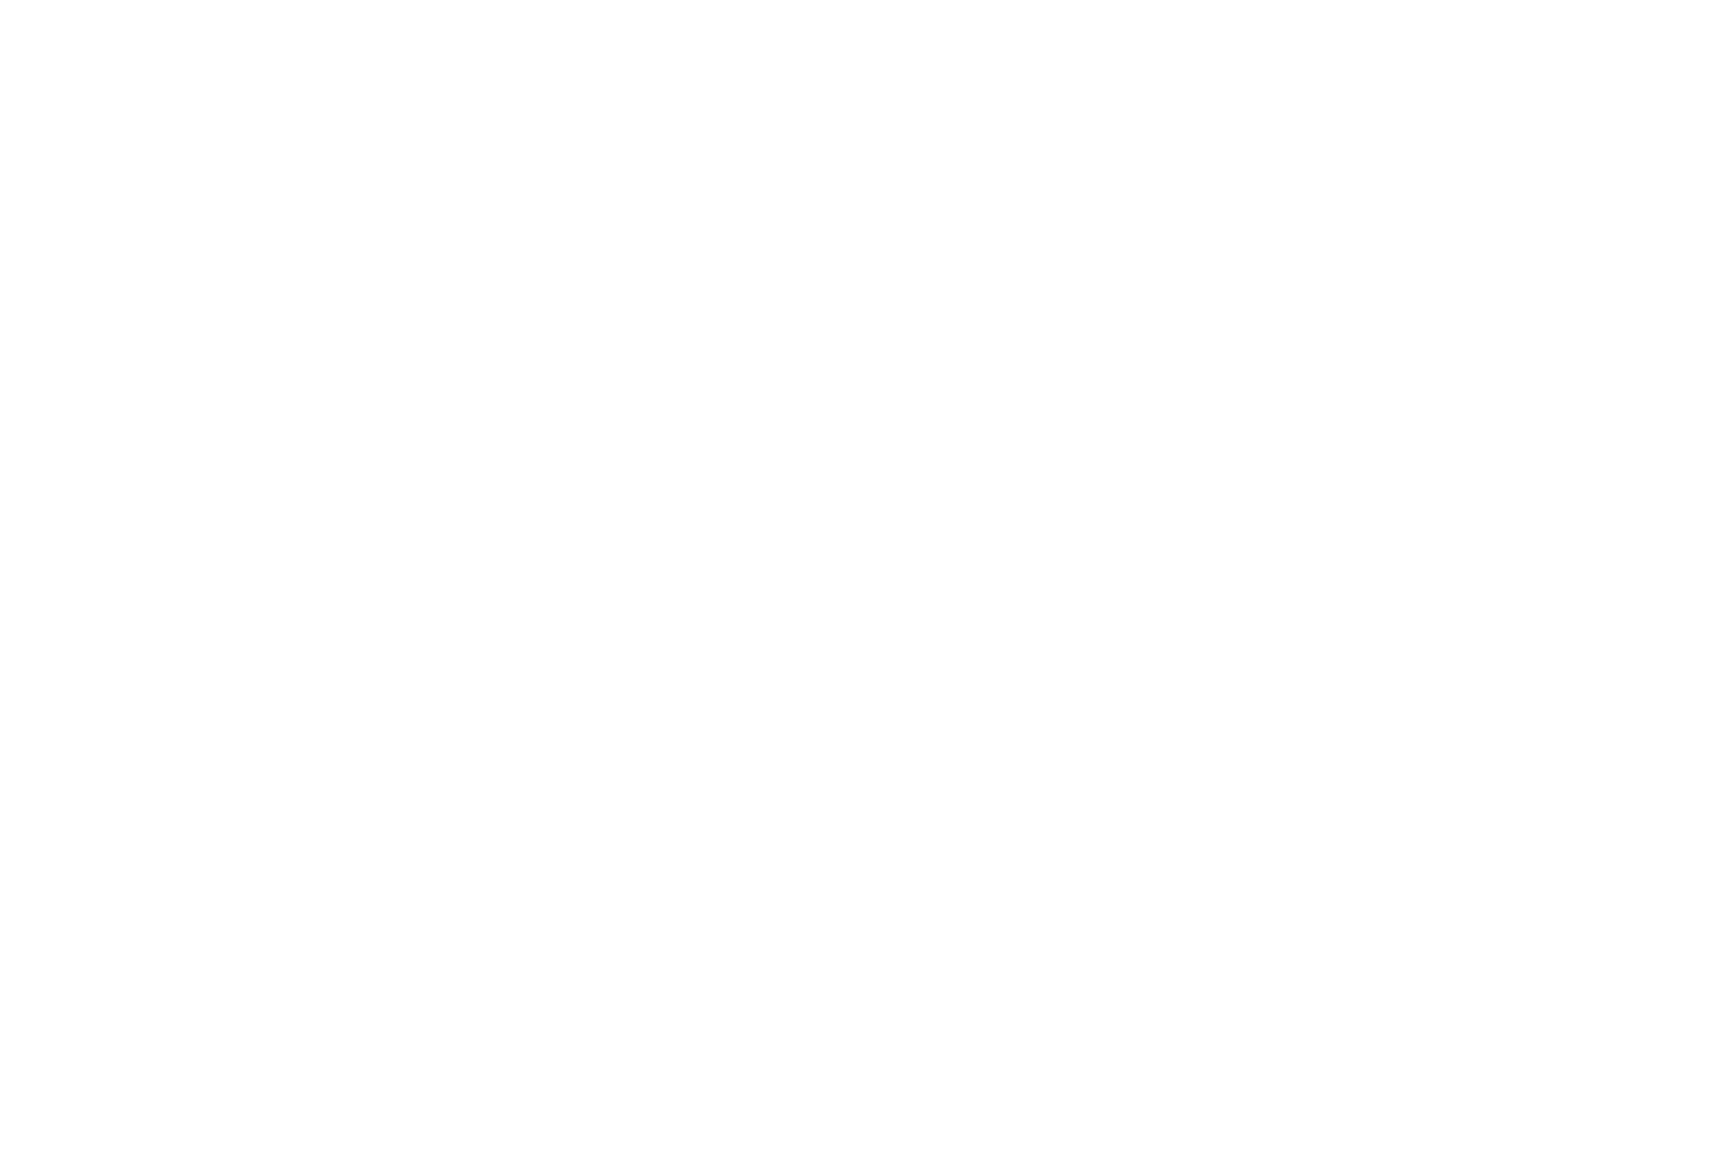 OFFICIAL SELECTION - Black Cat Picture Show - 2021 (1)